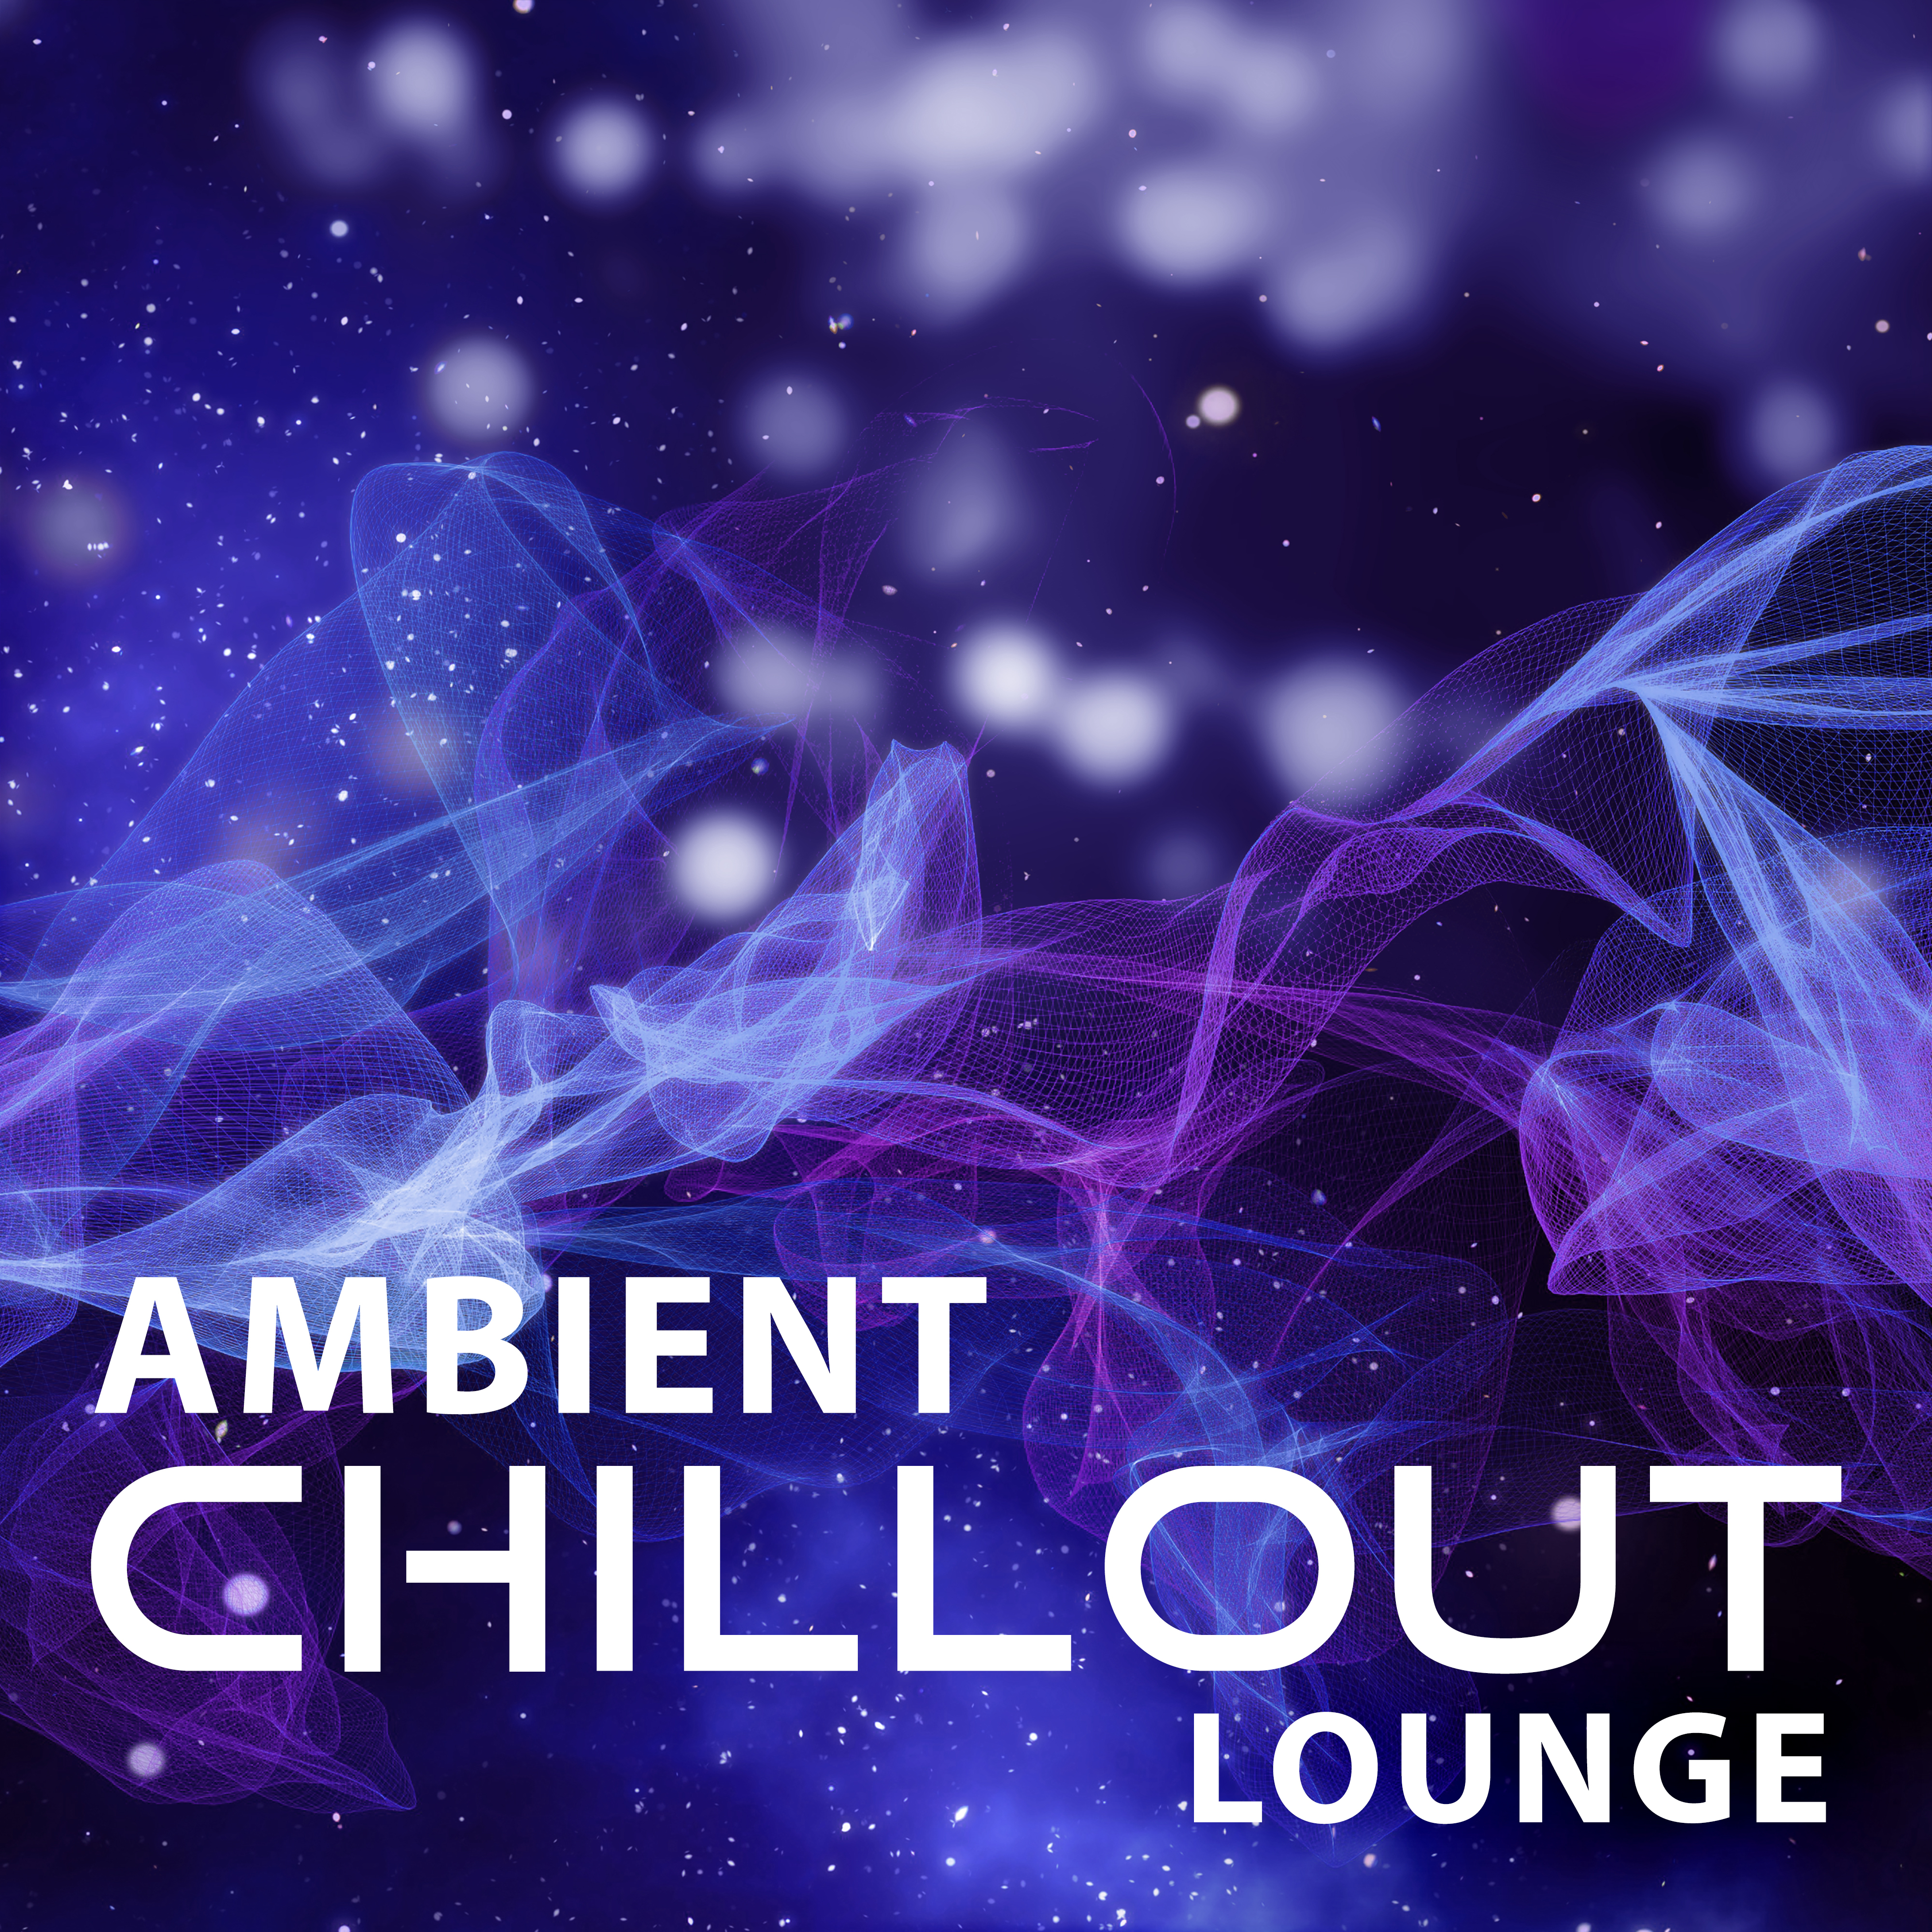 Ambient Chillout Lounge  Ambient Electronic Chillout, Deep Vibes, Ibiza Lounge, Del Mar, Beach Music, Chill Out 2016, Deep Chill Out, Ibiza Dance Party, Sexy Chill Out